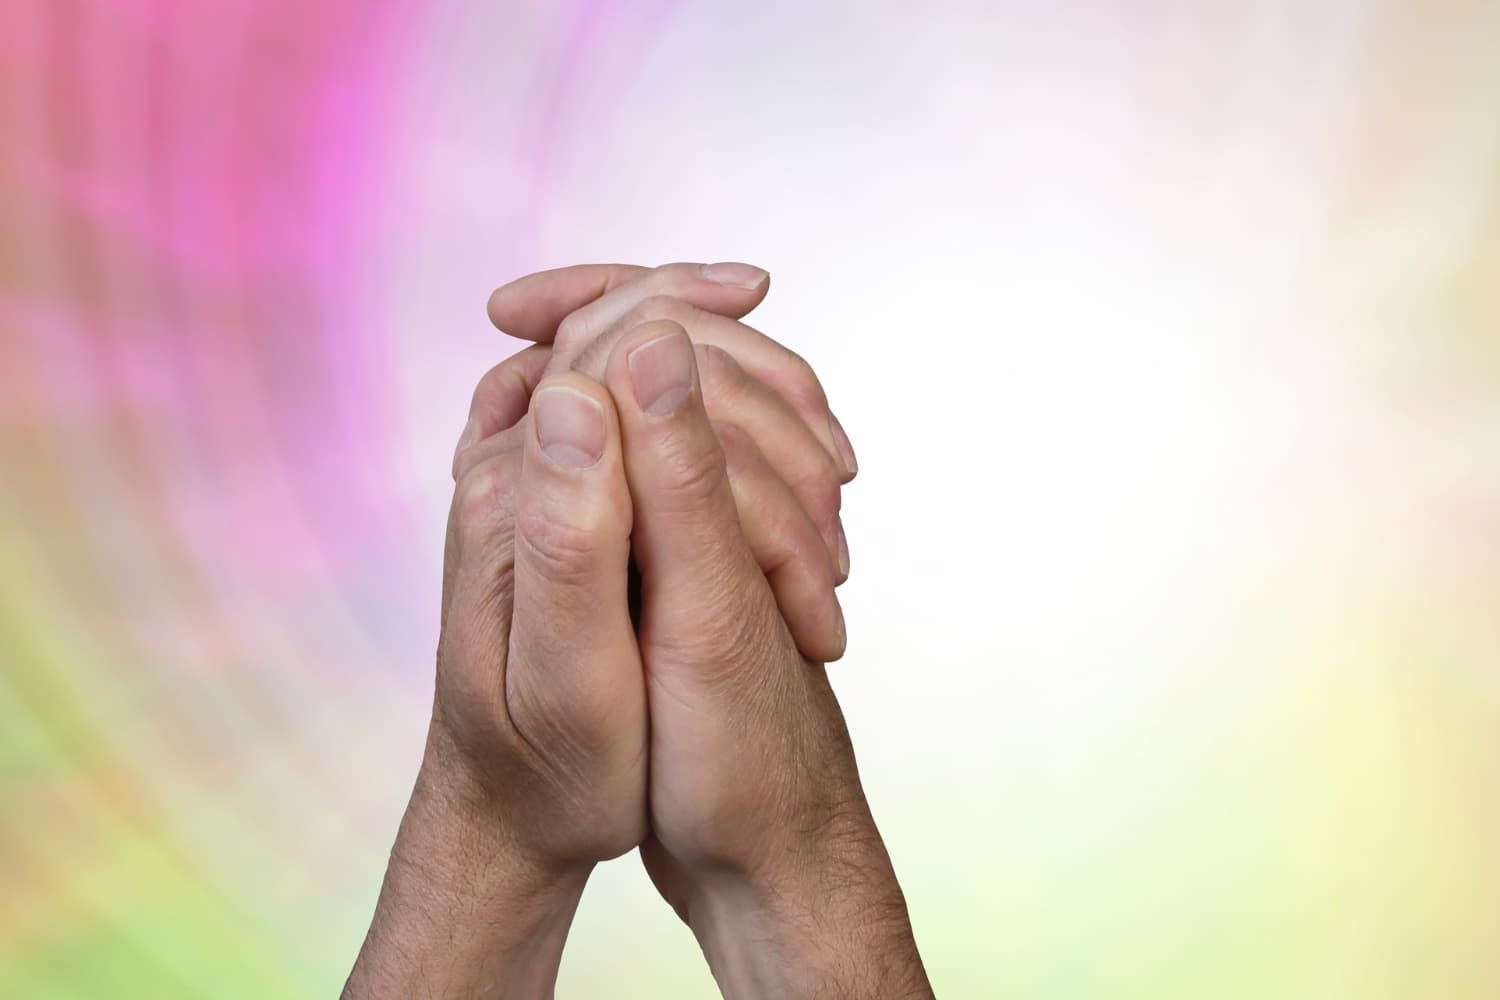 An image of two praying hands that will encourage children to pray and make a connection to God in your children